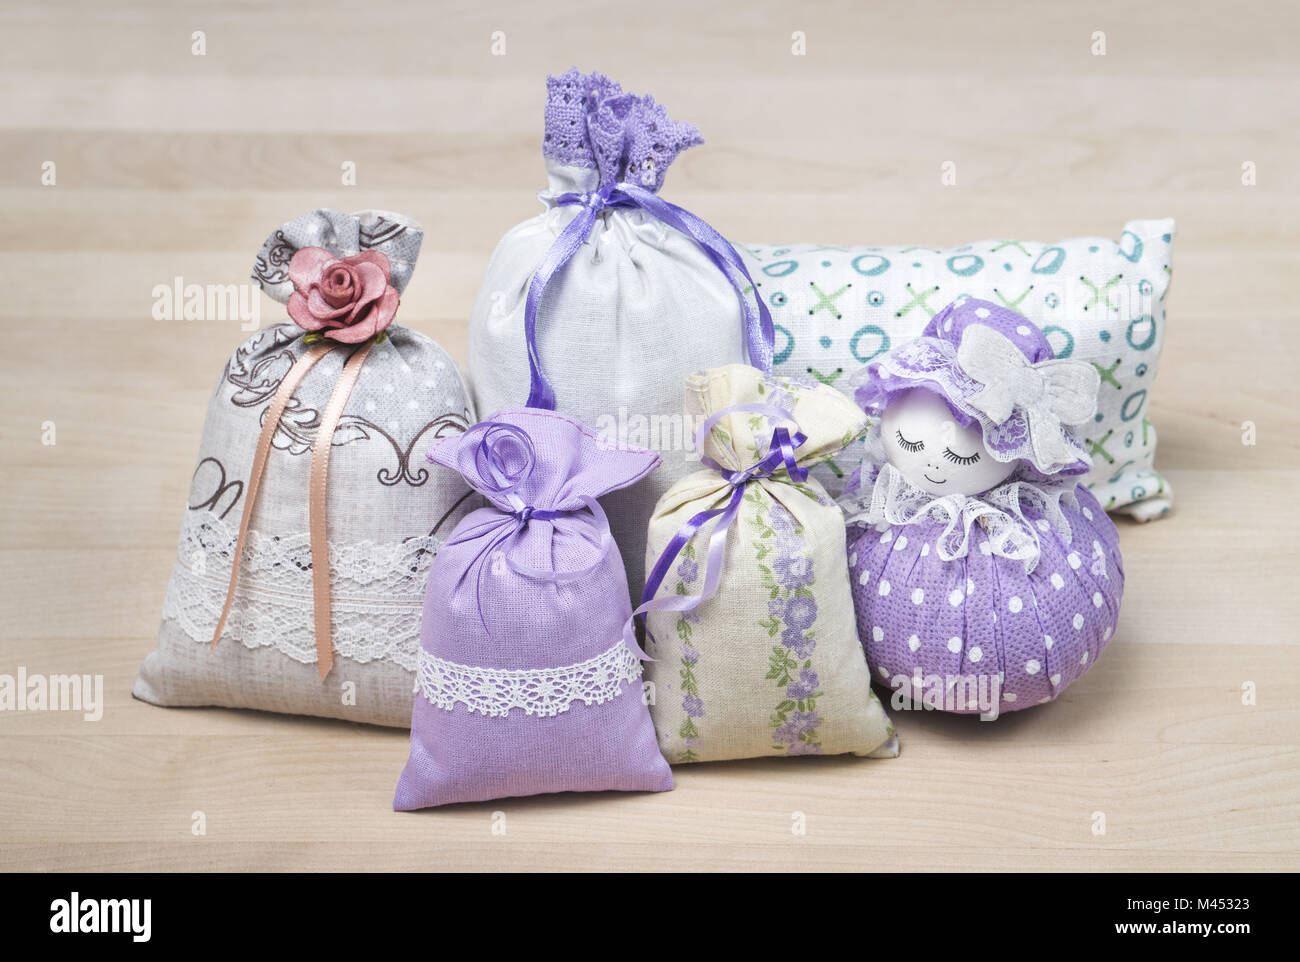 Bunch of different scented sachets for decoration on wooden board. Many fragrant pouches on table. Aromatic potpourri set. Bags filled with lavender.  Stock Photo